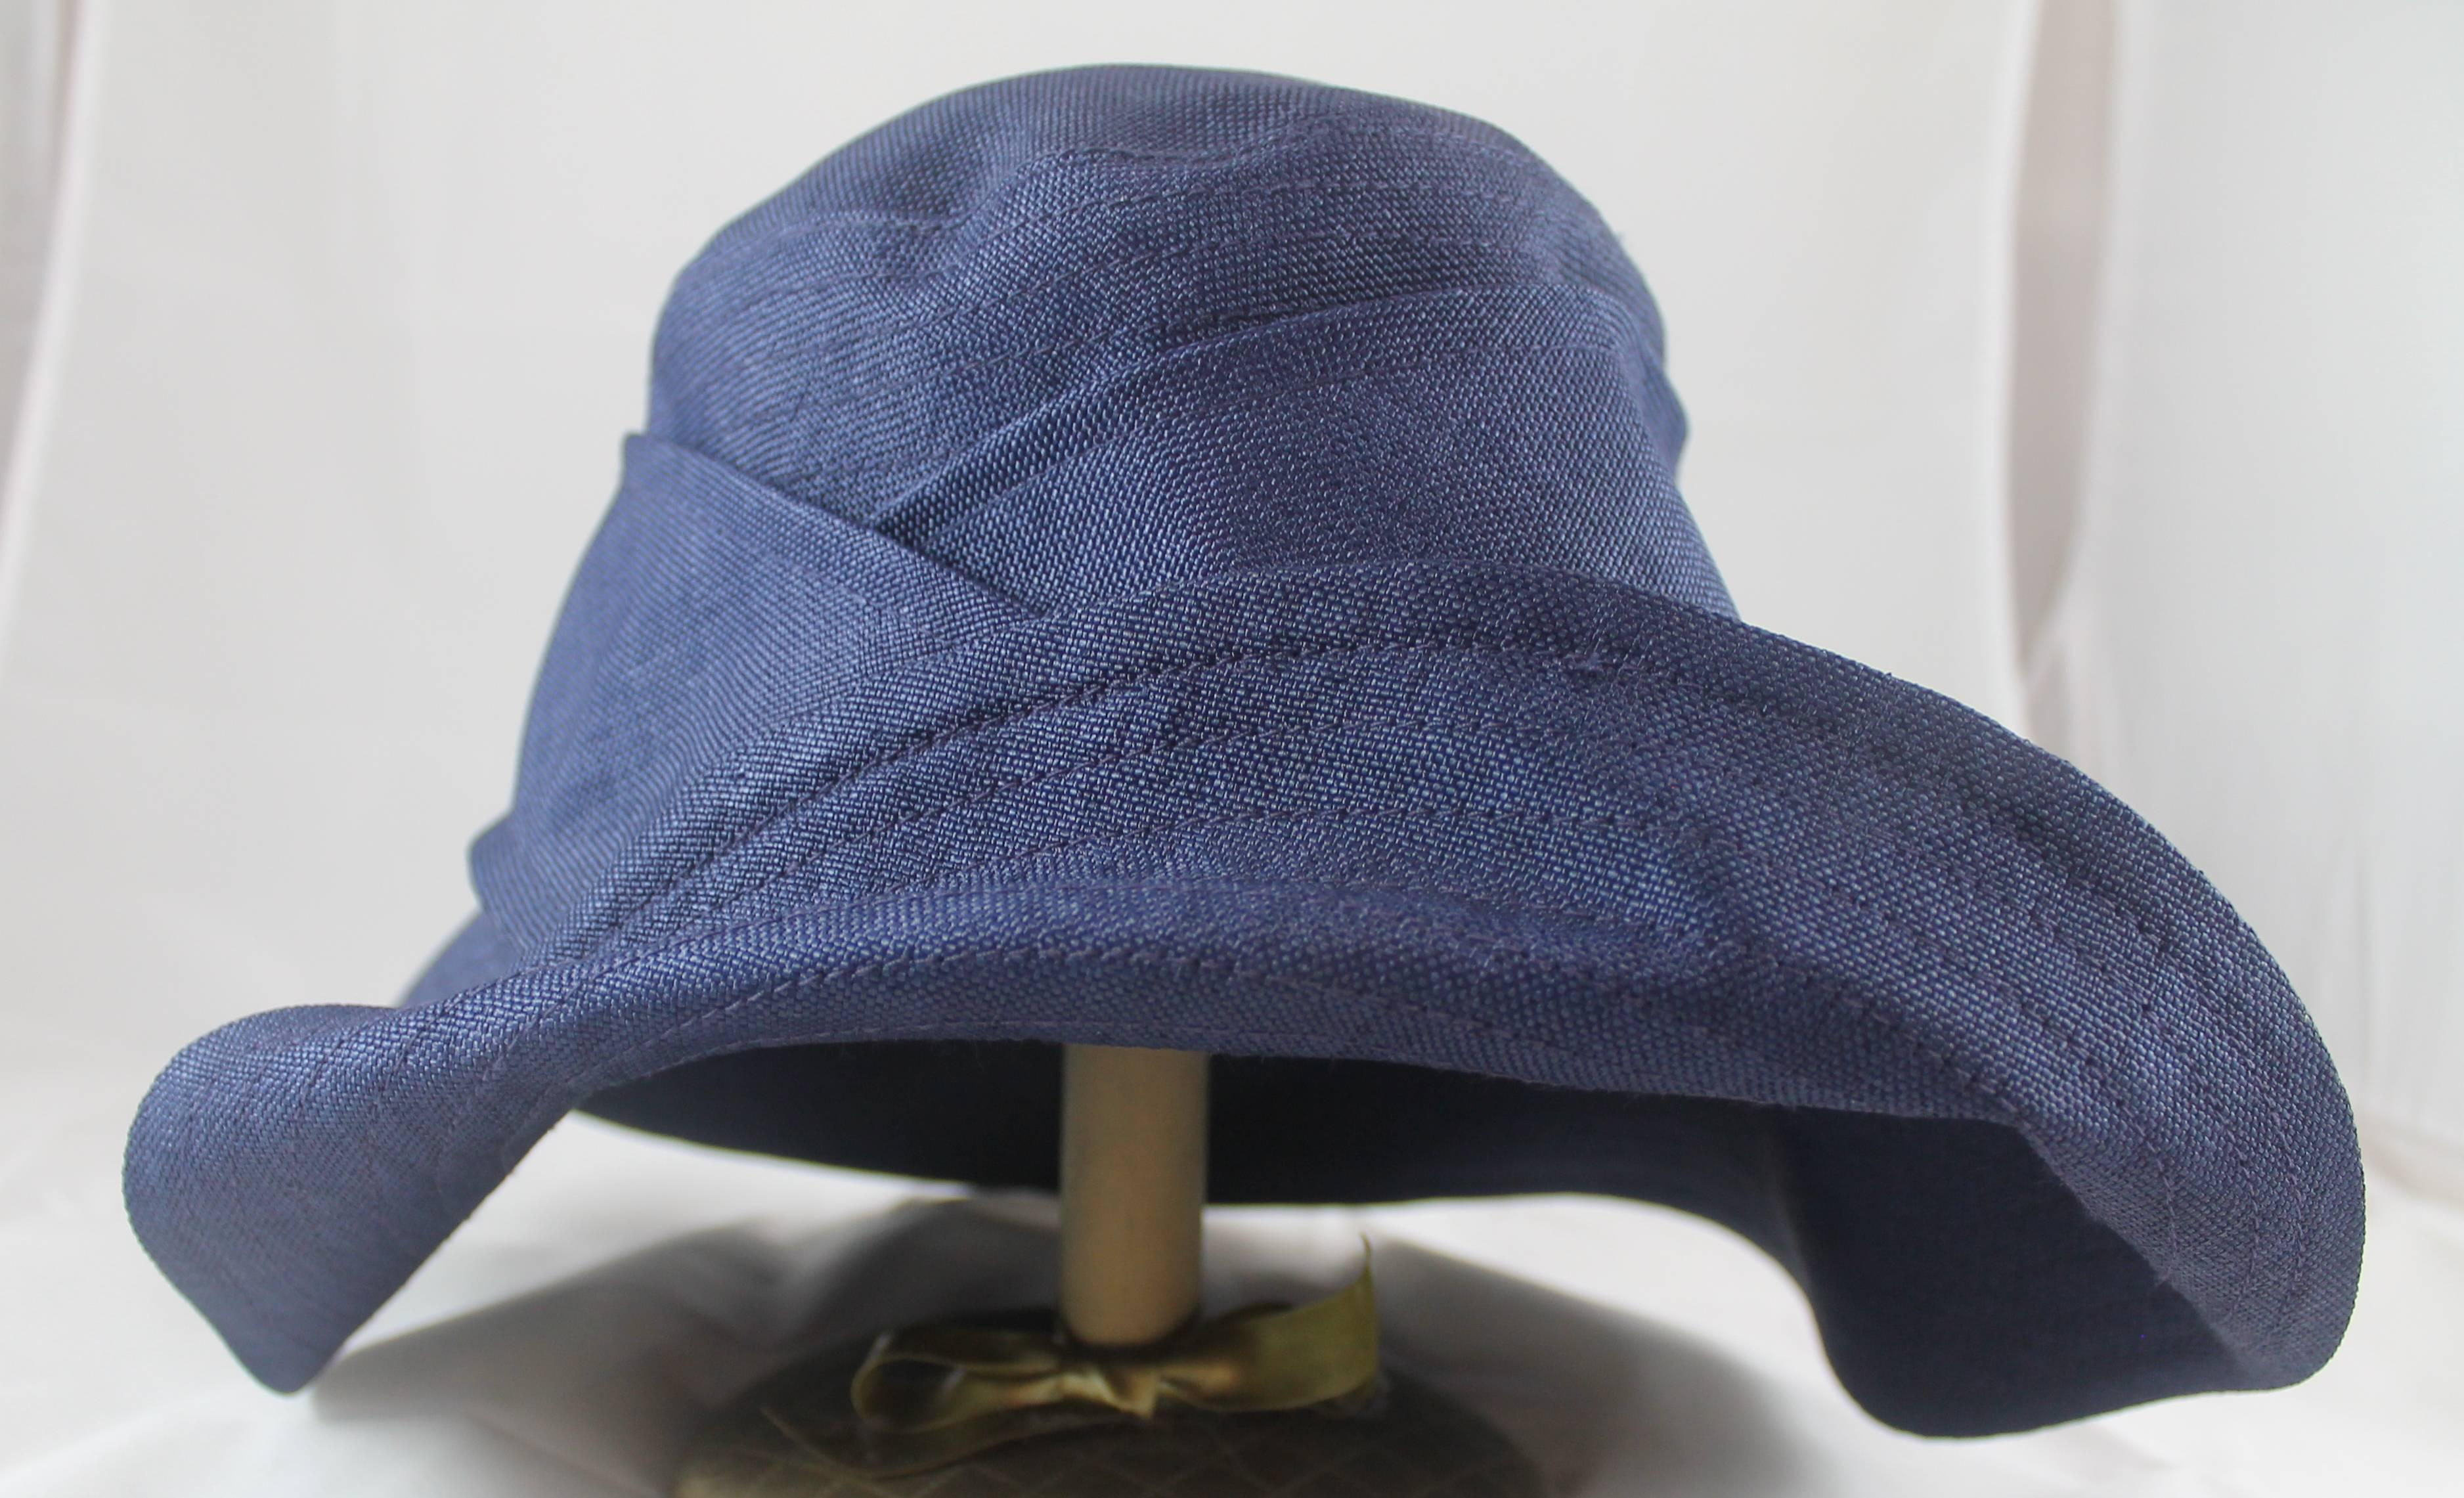 Suzanne Custom Millinery Navy Thin Raffia Hat with Buttons. This floppy fold over style hat has 2 front buttons. Half of the brim is folded up and connected to the center trim of the hat. It is in excellent condition.